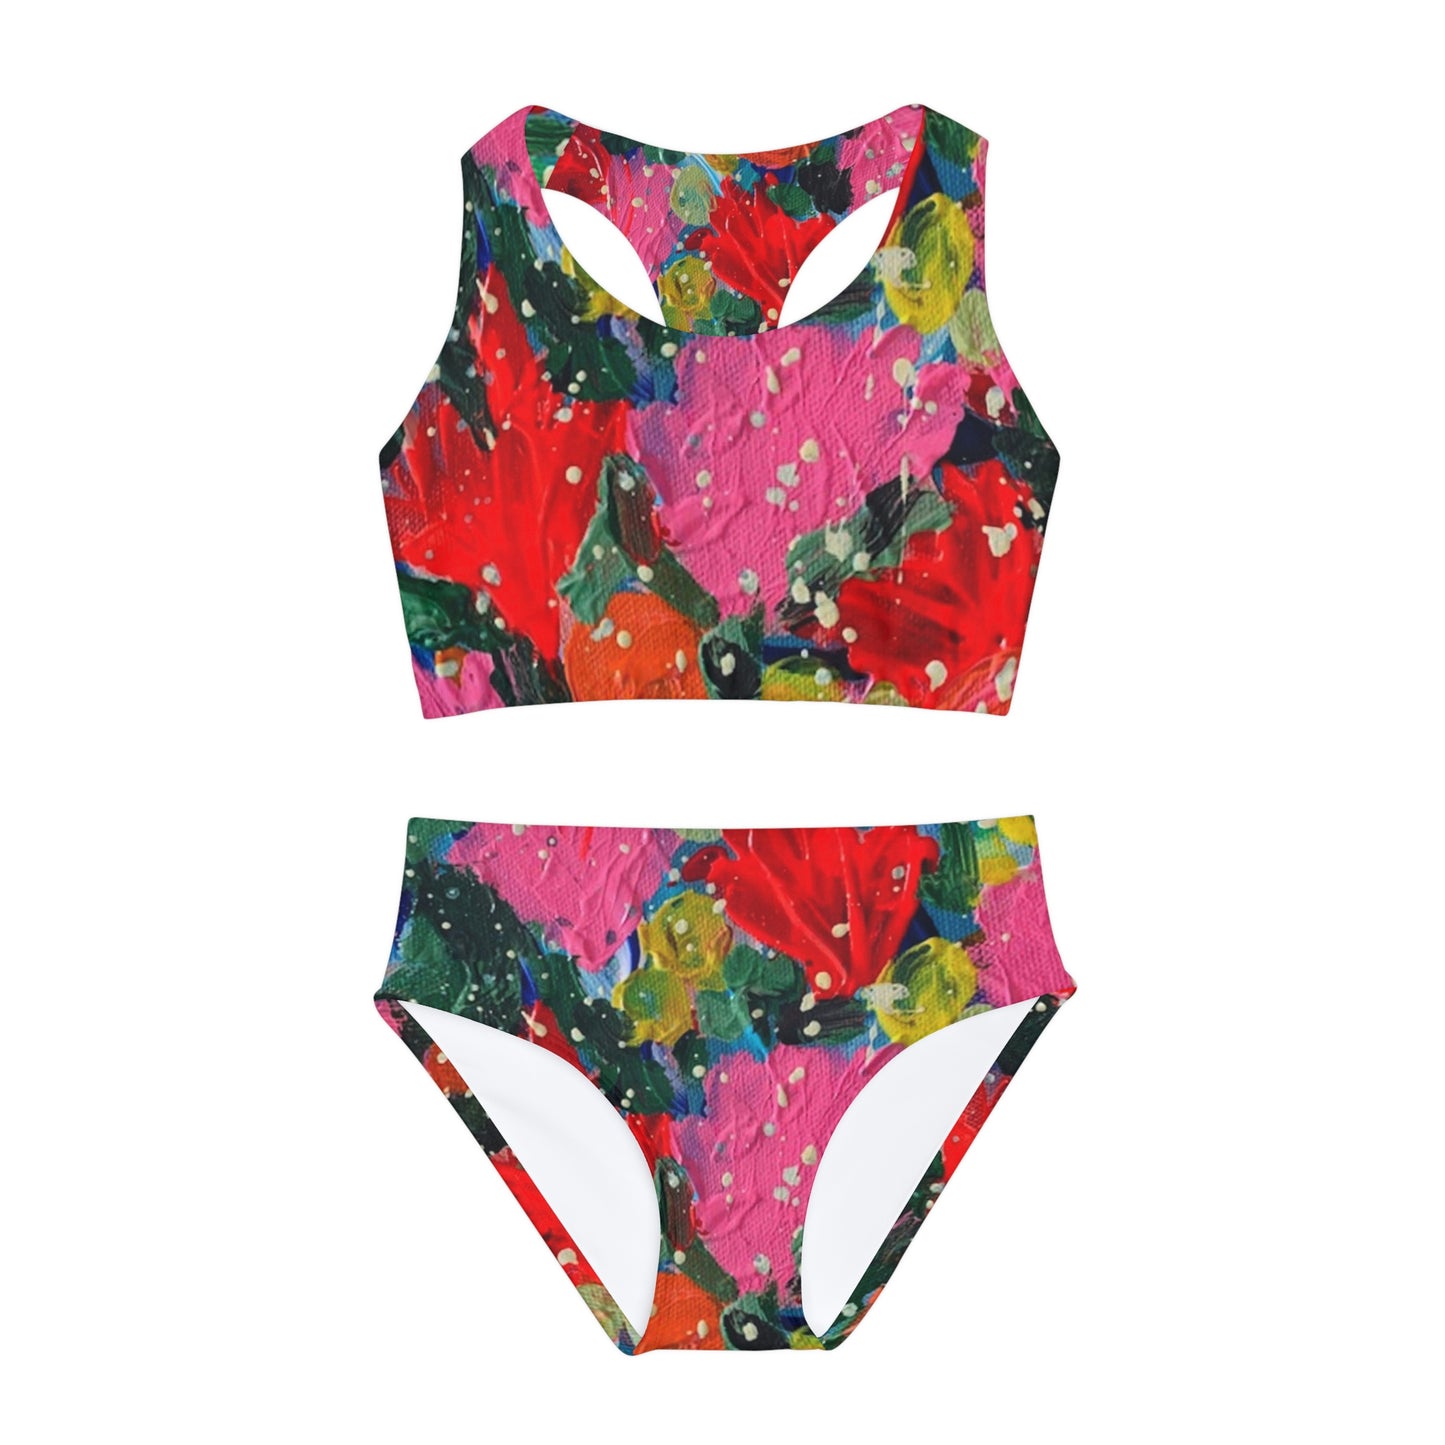 "I Adore You" Girls /Kids  Two Piece Swimsuit